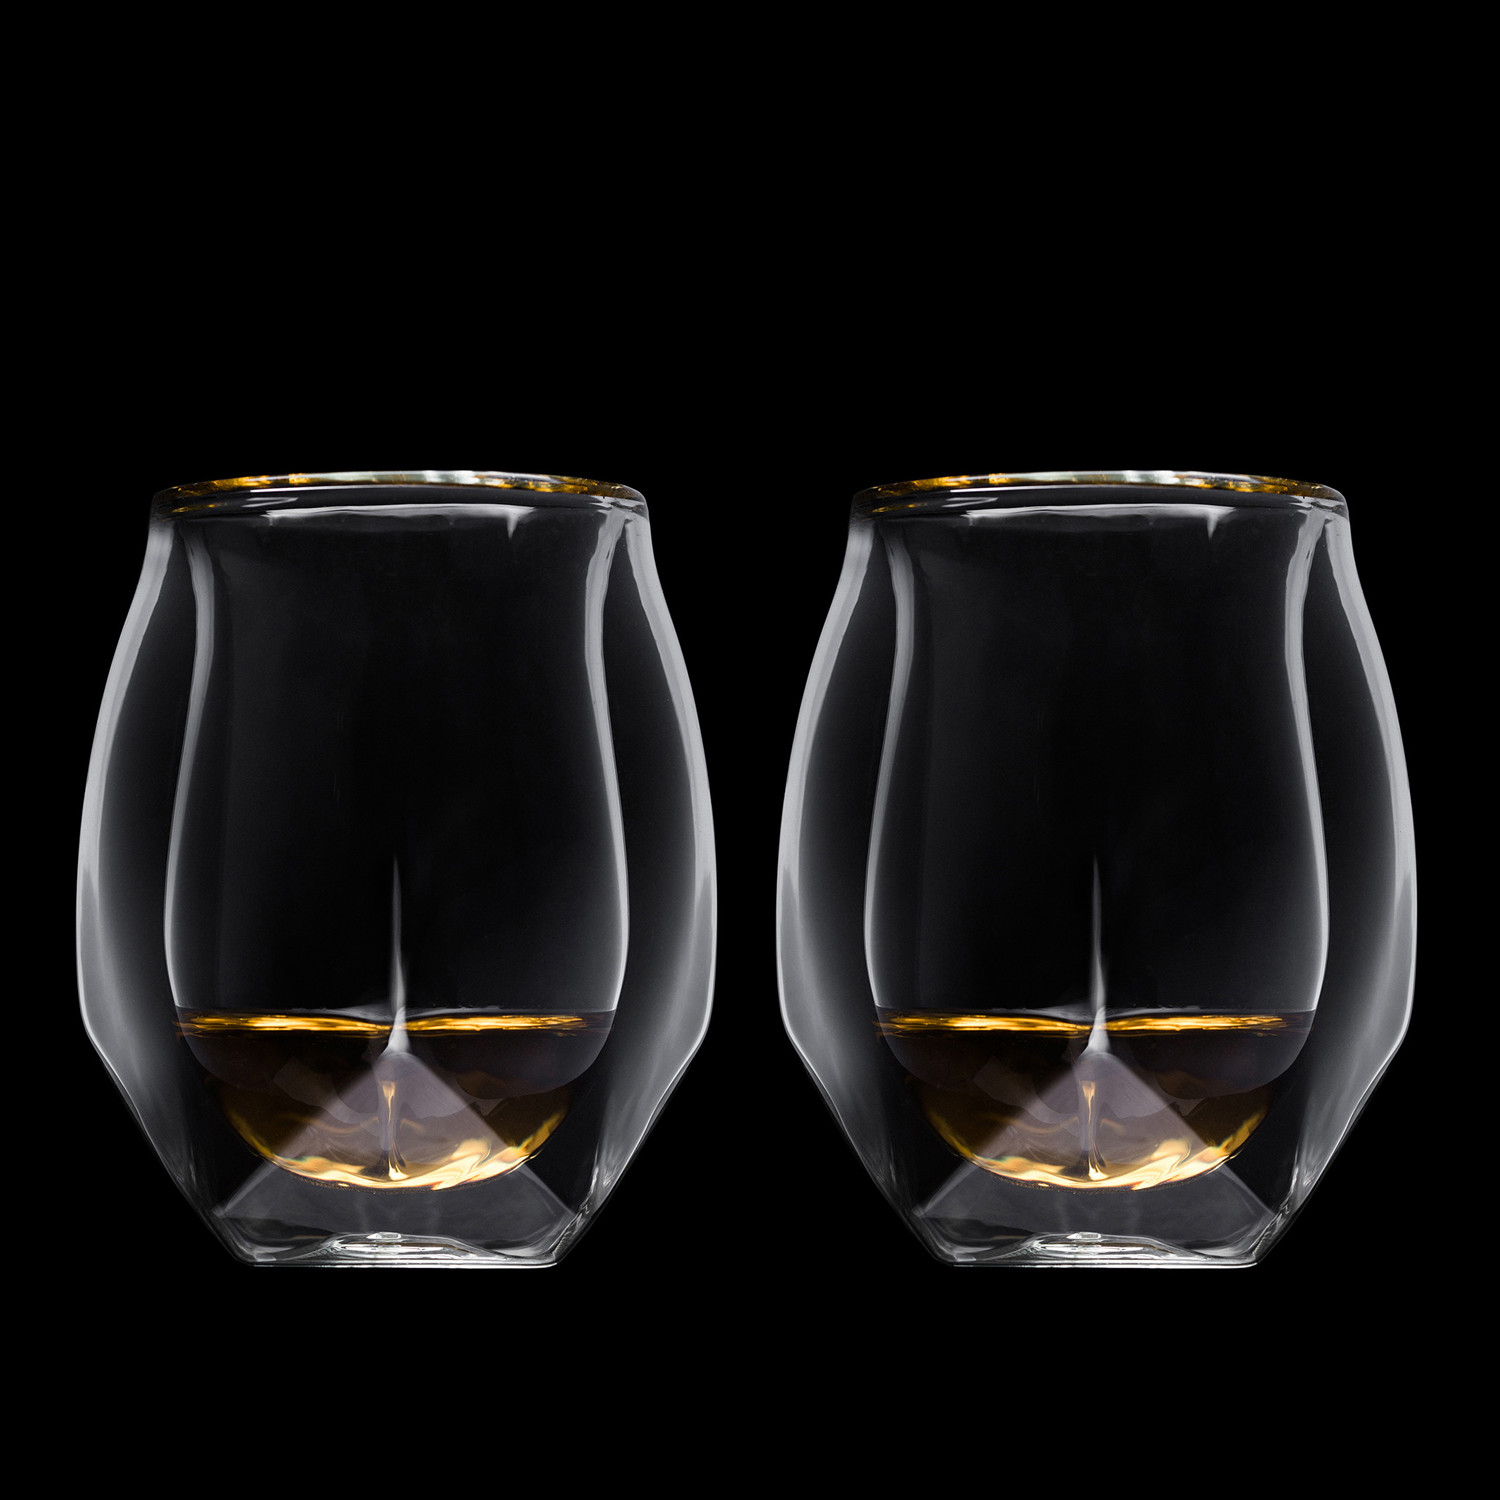 Norlan Whisky Glass, Set of 2 856515006002